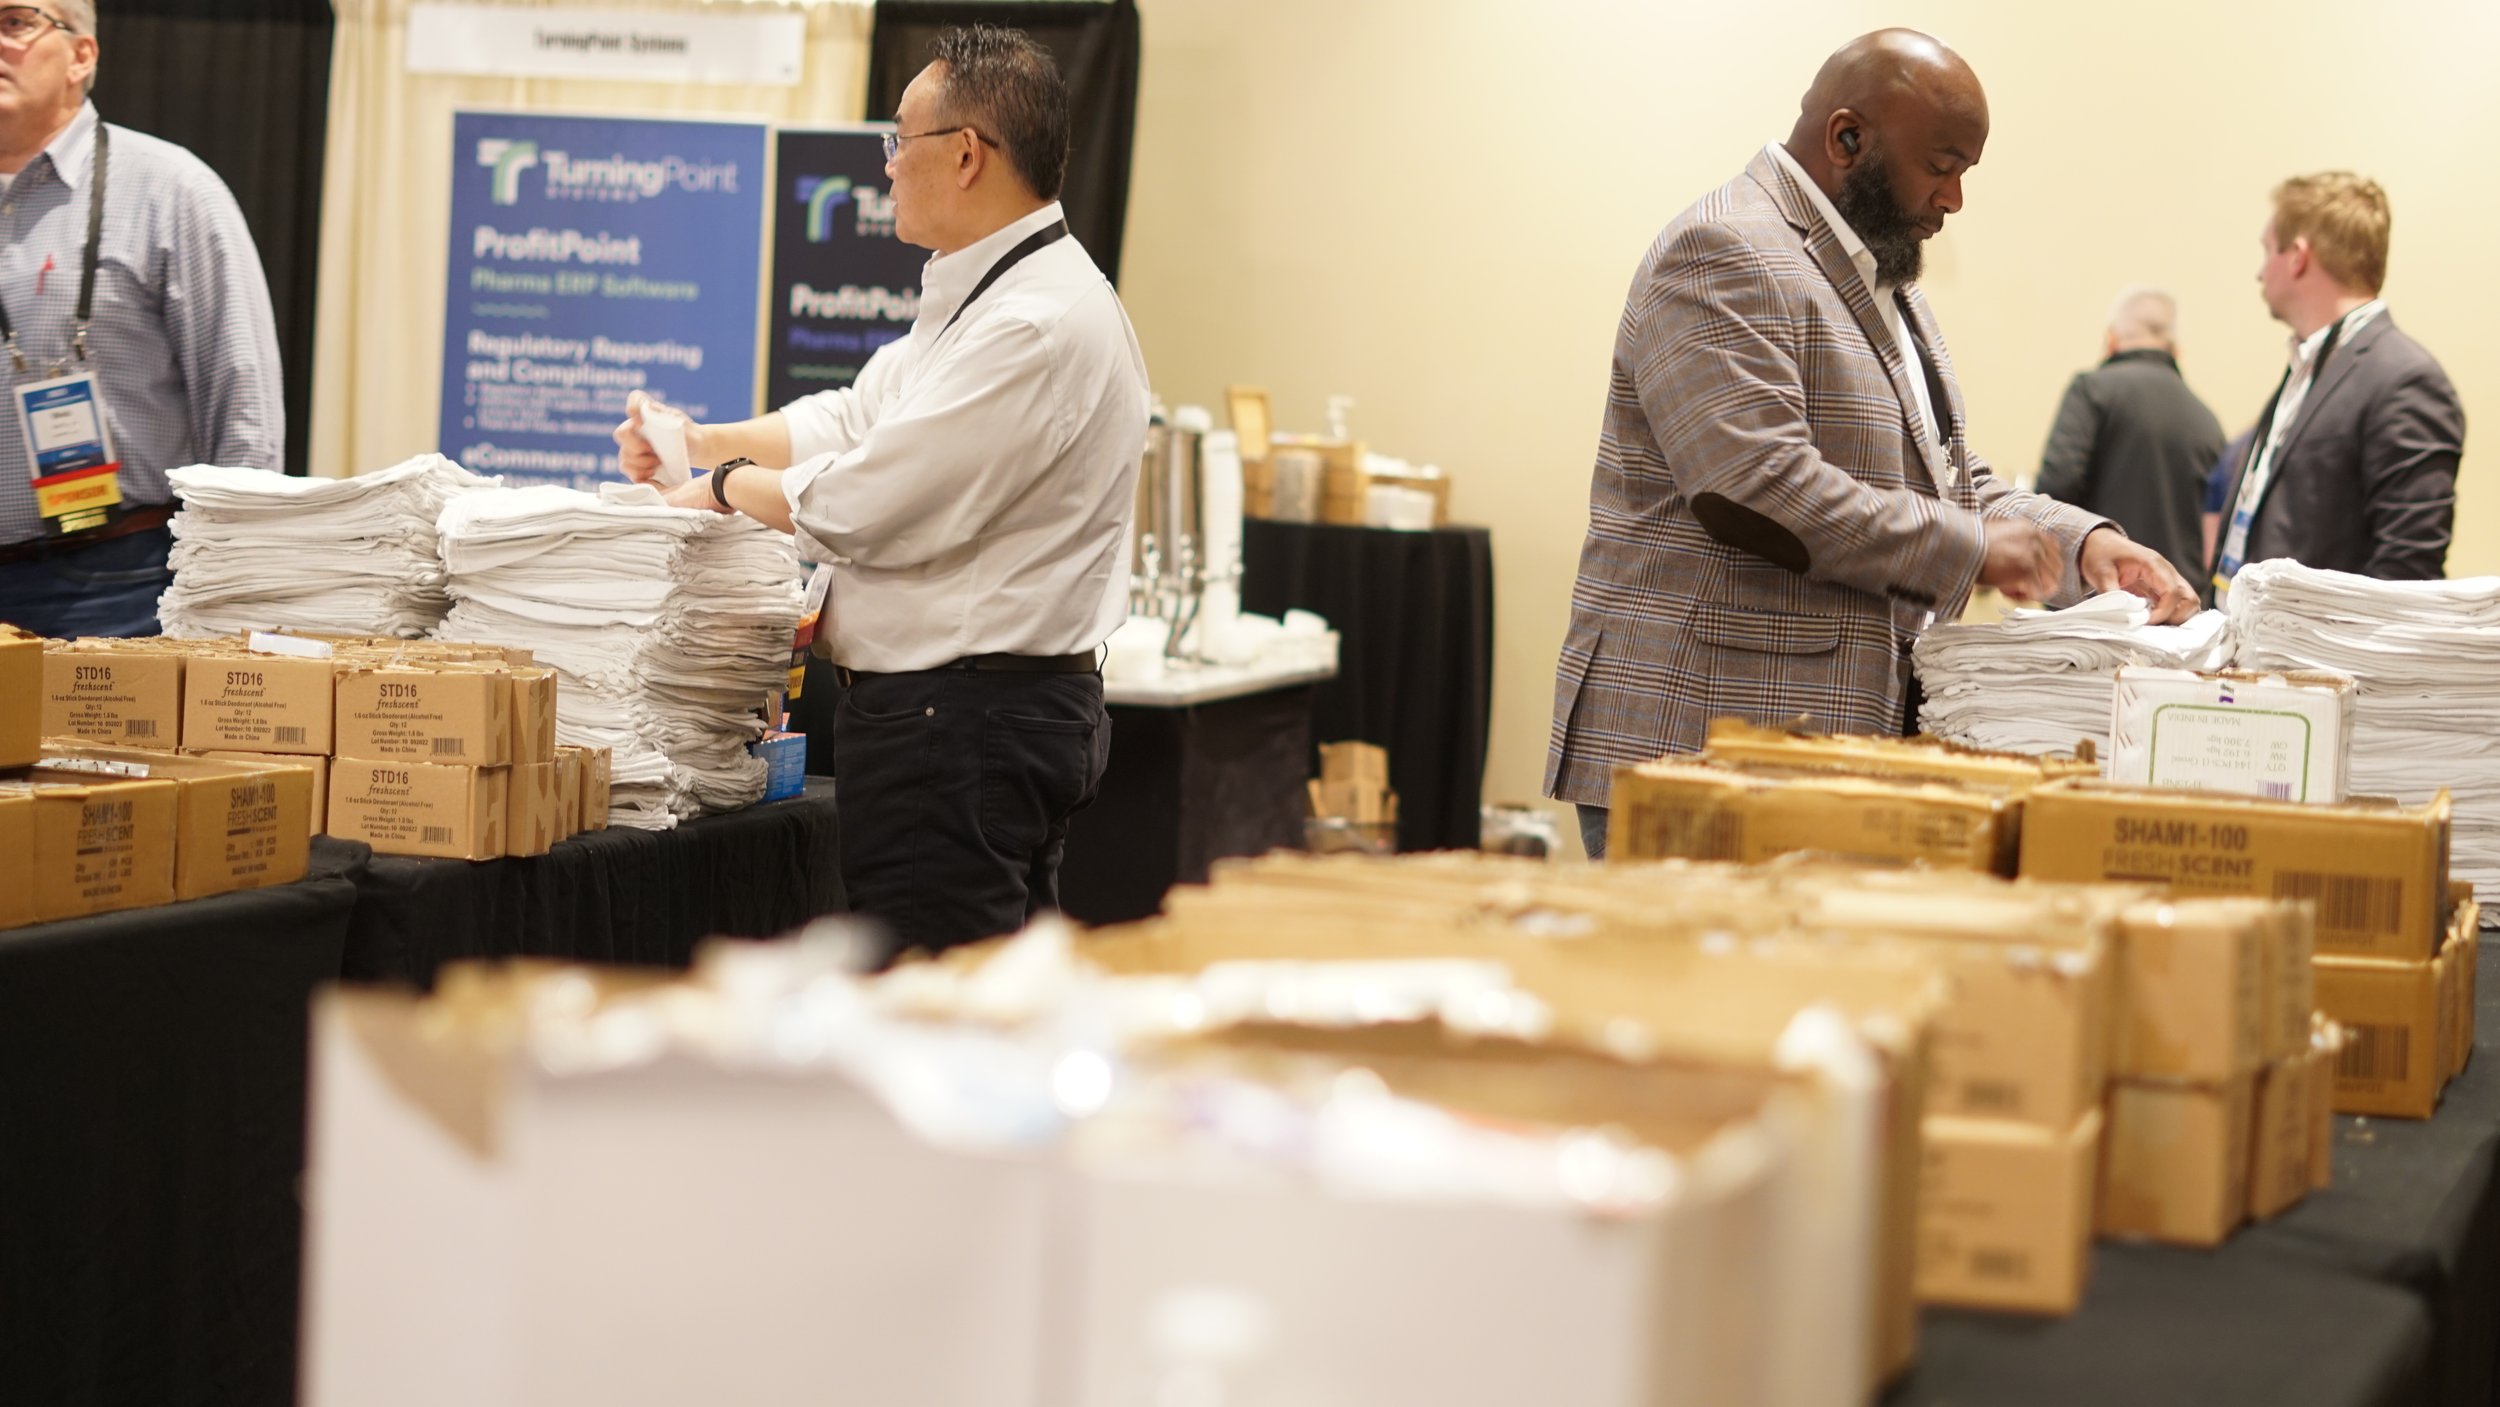  Volunteers assemble hygiene kits on March 14, 2023, during the Healthcare Distribution Alliance conference at the JW Marriott in downtown Indianapolis. The organization partnered with United Way of Central Indiana to offer the service project during